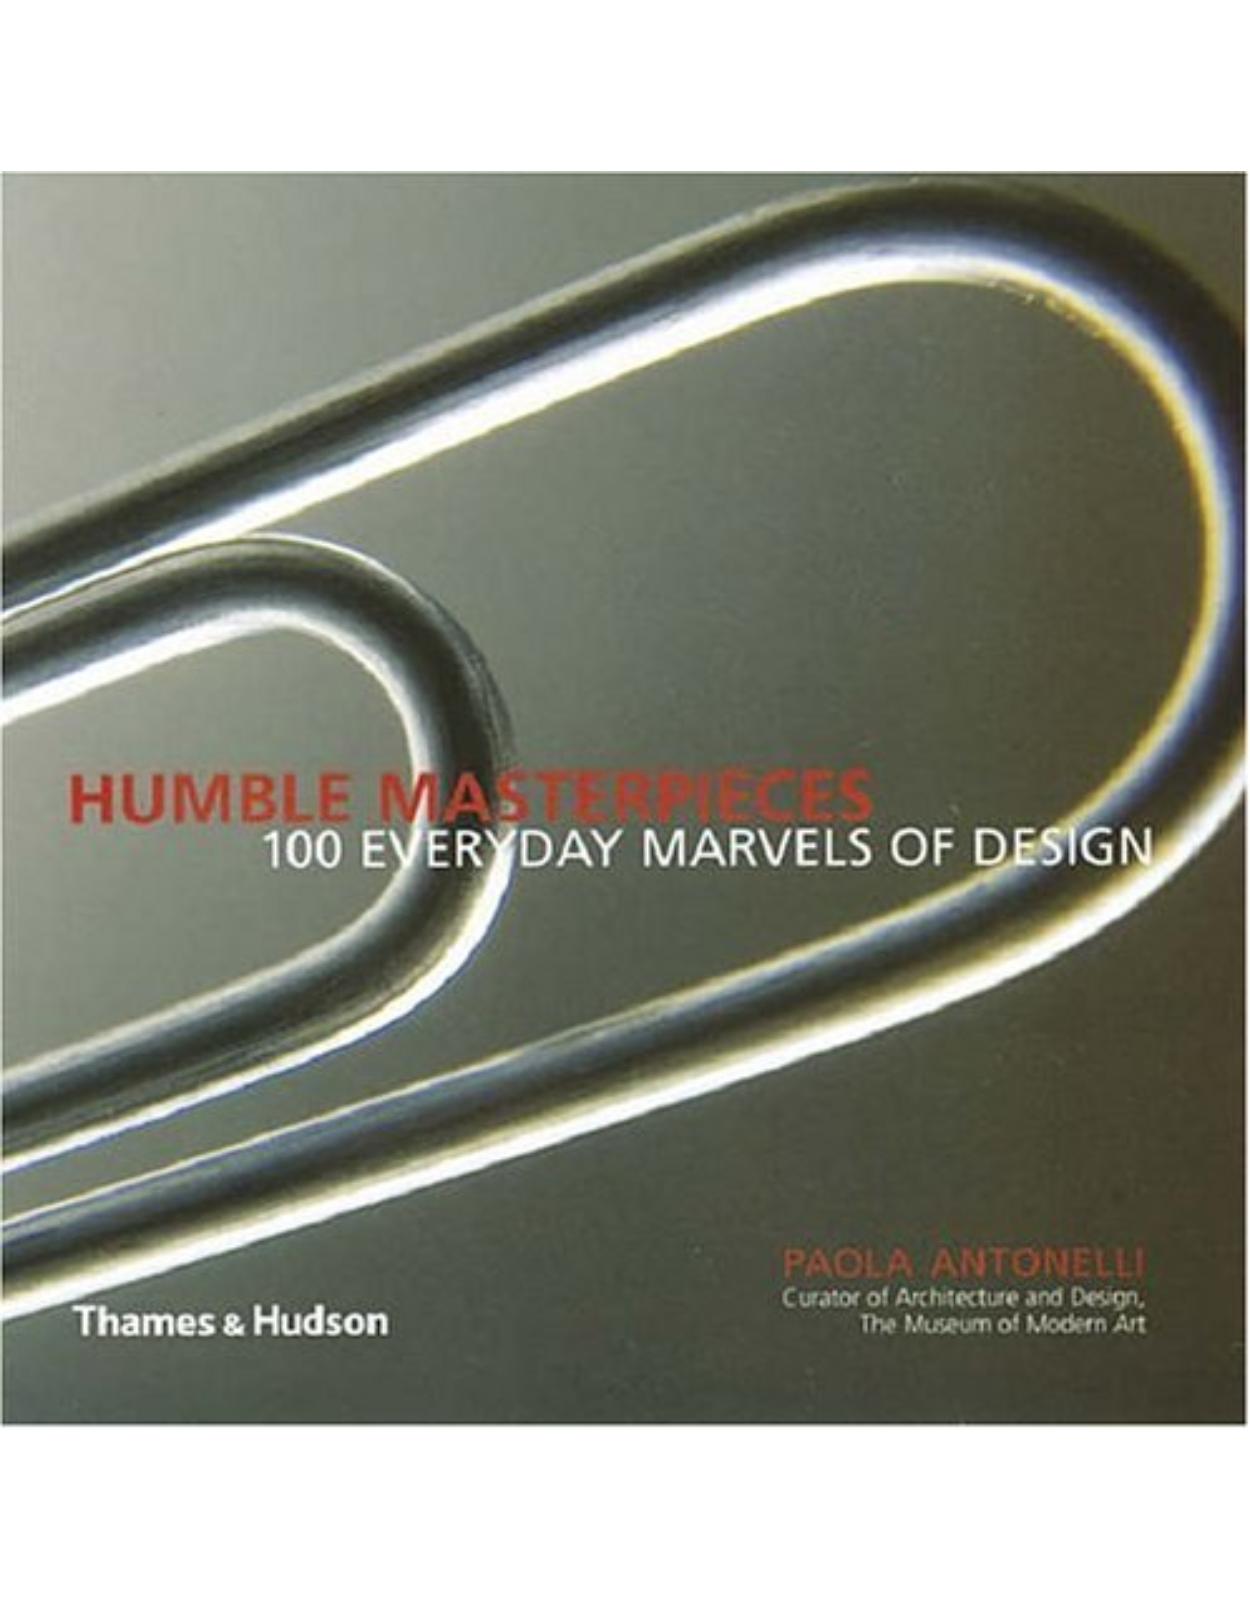 Humble Masterpieces: 100 Everyday Marvels of Design